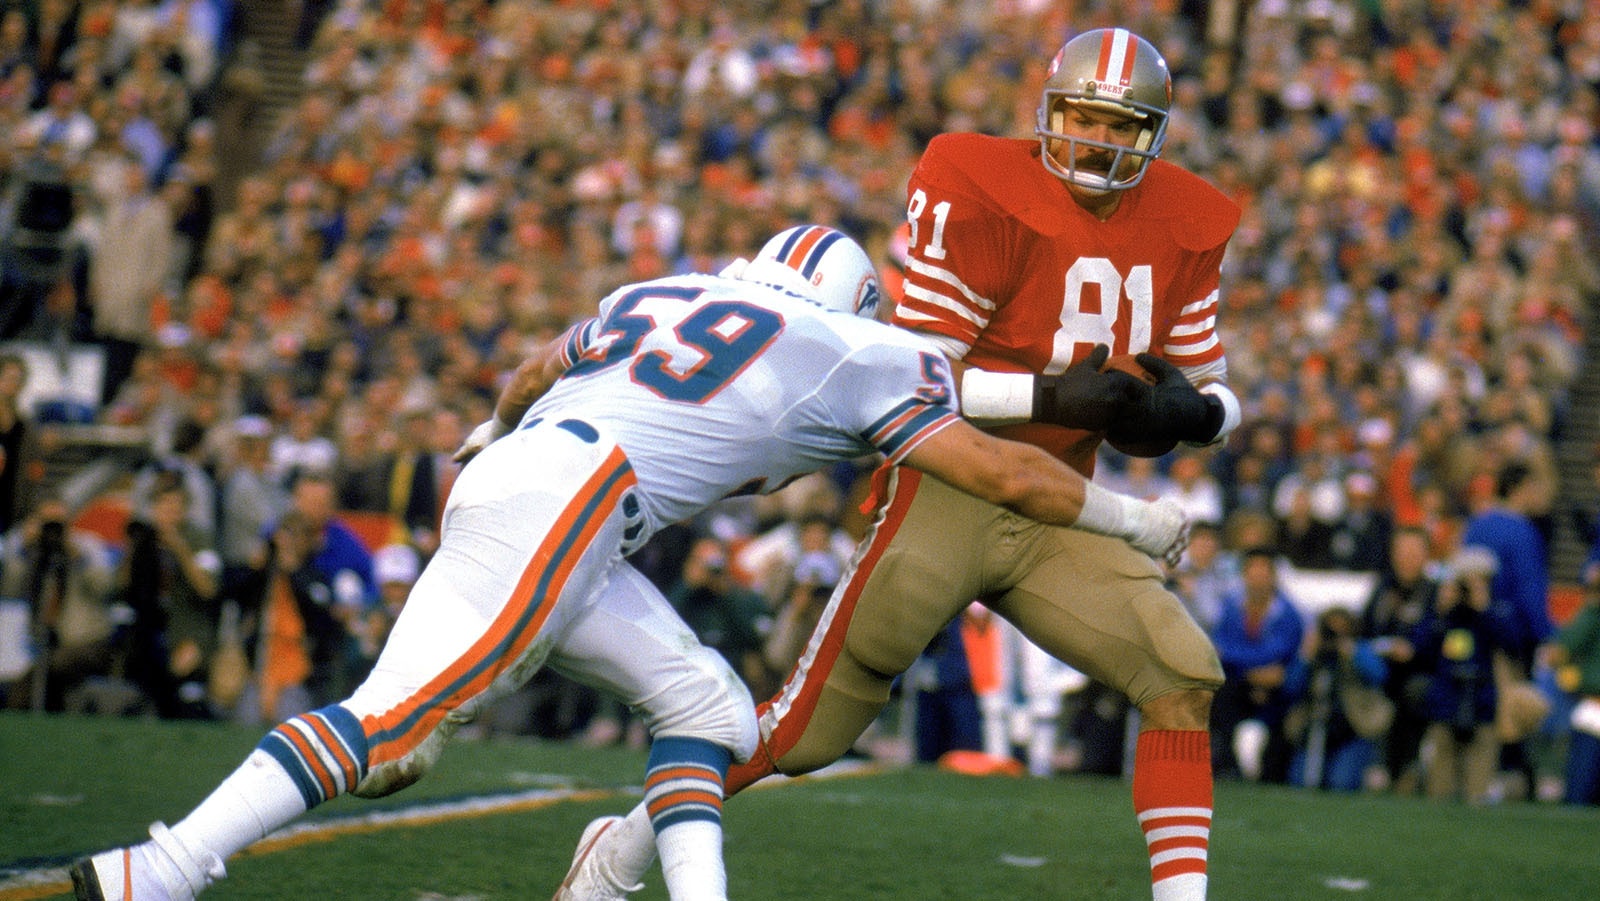 Russ Francis of the San Francisco 49ers, right, works to escape a tackle during Super Bowl XIX against the Miami Dolphins at Stanford Stadium on Jan. 20, 1985, in Stanford, California. The 49ers beat the Dolphins 38-16.